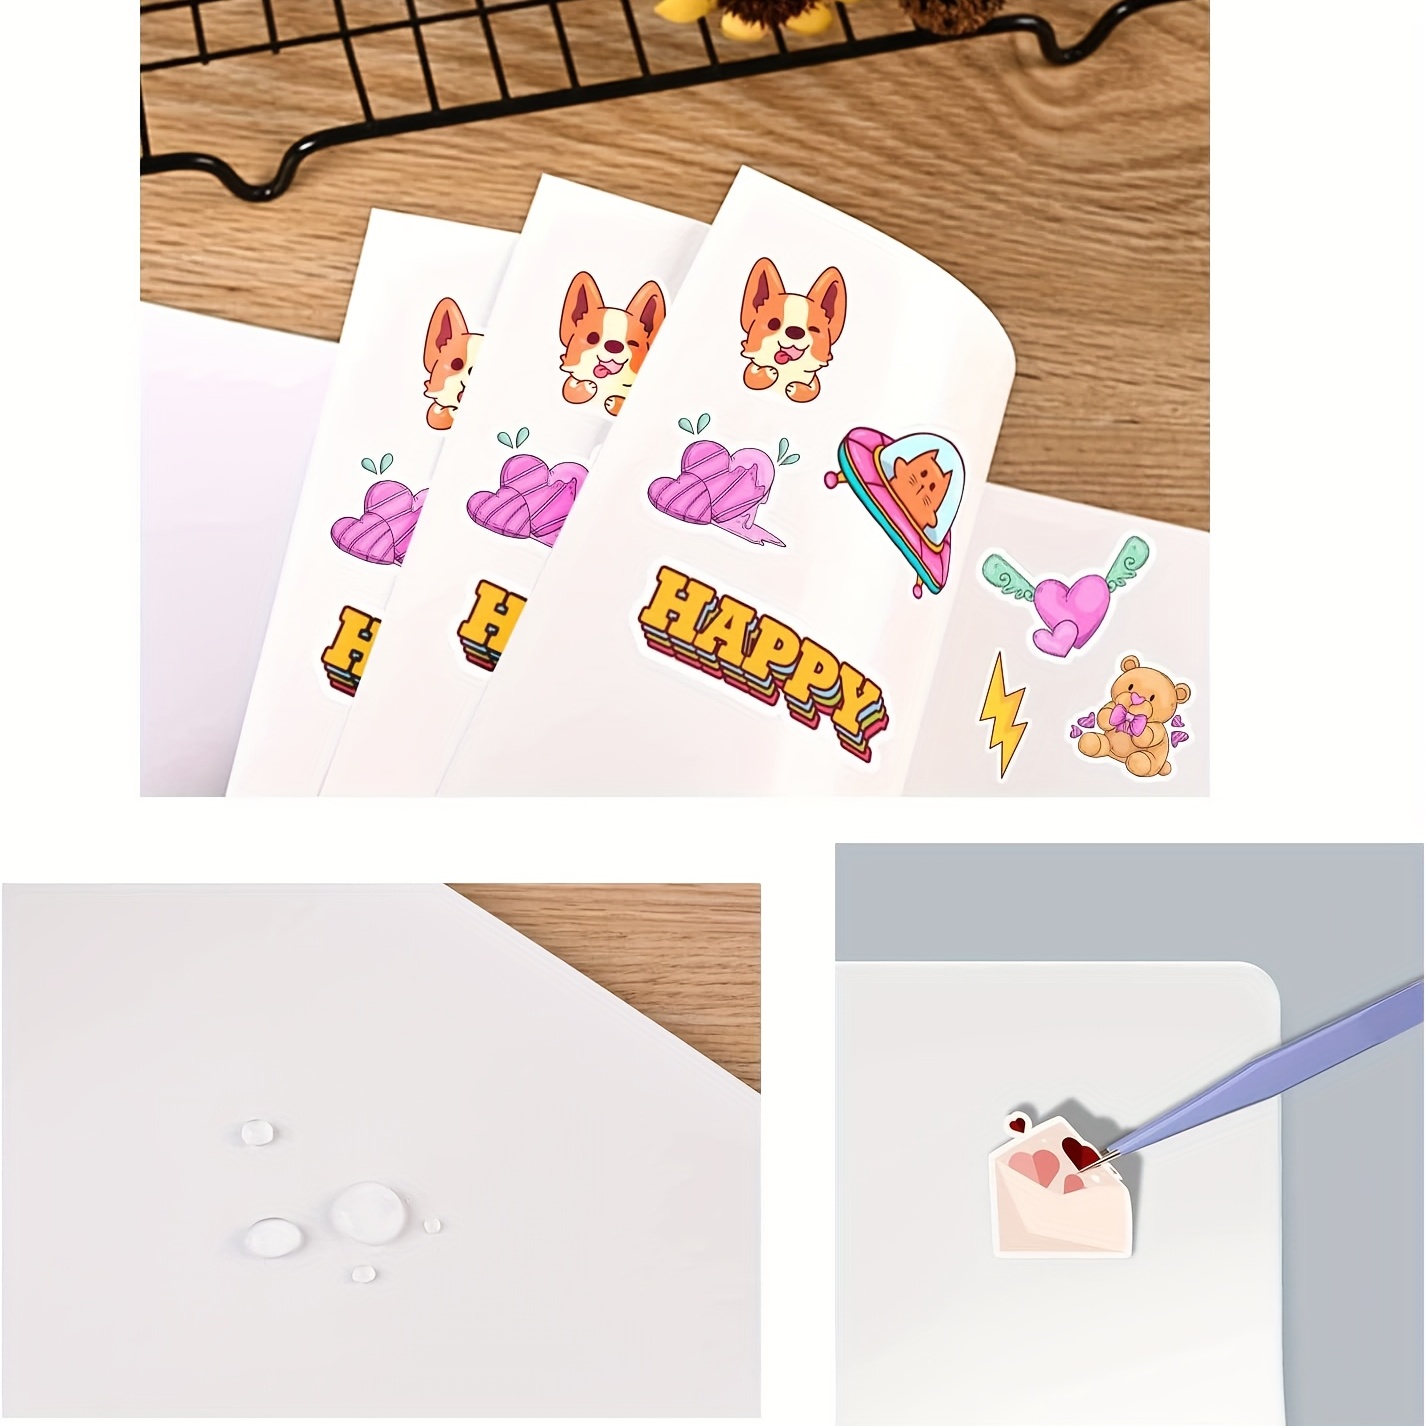 2 Pcs Sticker Book Collecting Album Sticker Collecting Book Sticker Collecting Album Sticker Album Blank Sticker Book A5 Size 8.3 x 5.8 Inches with